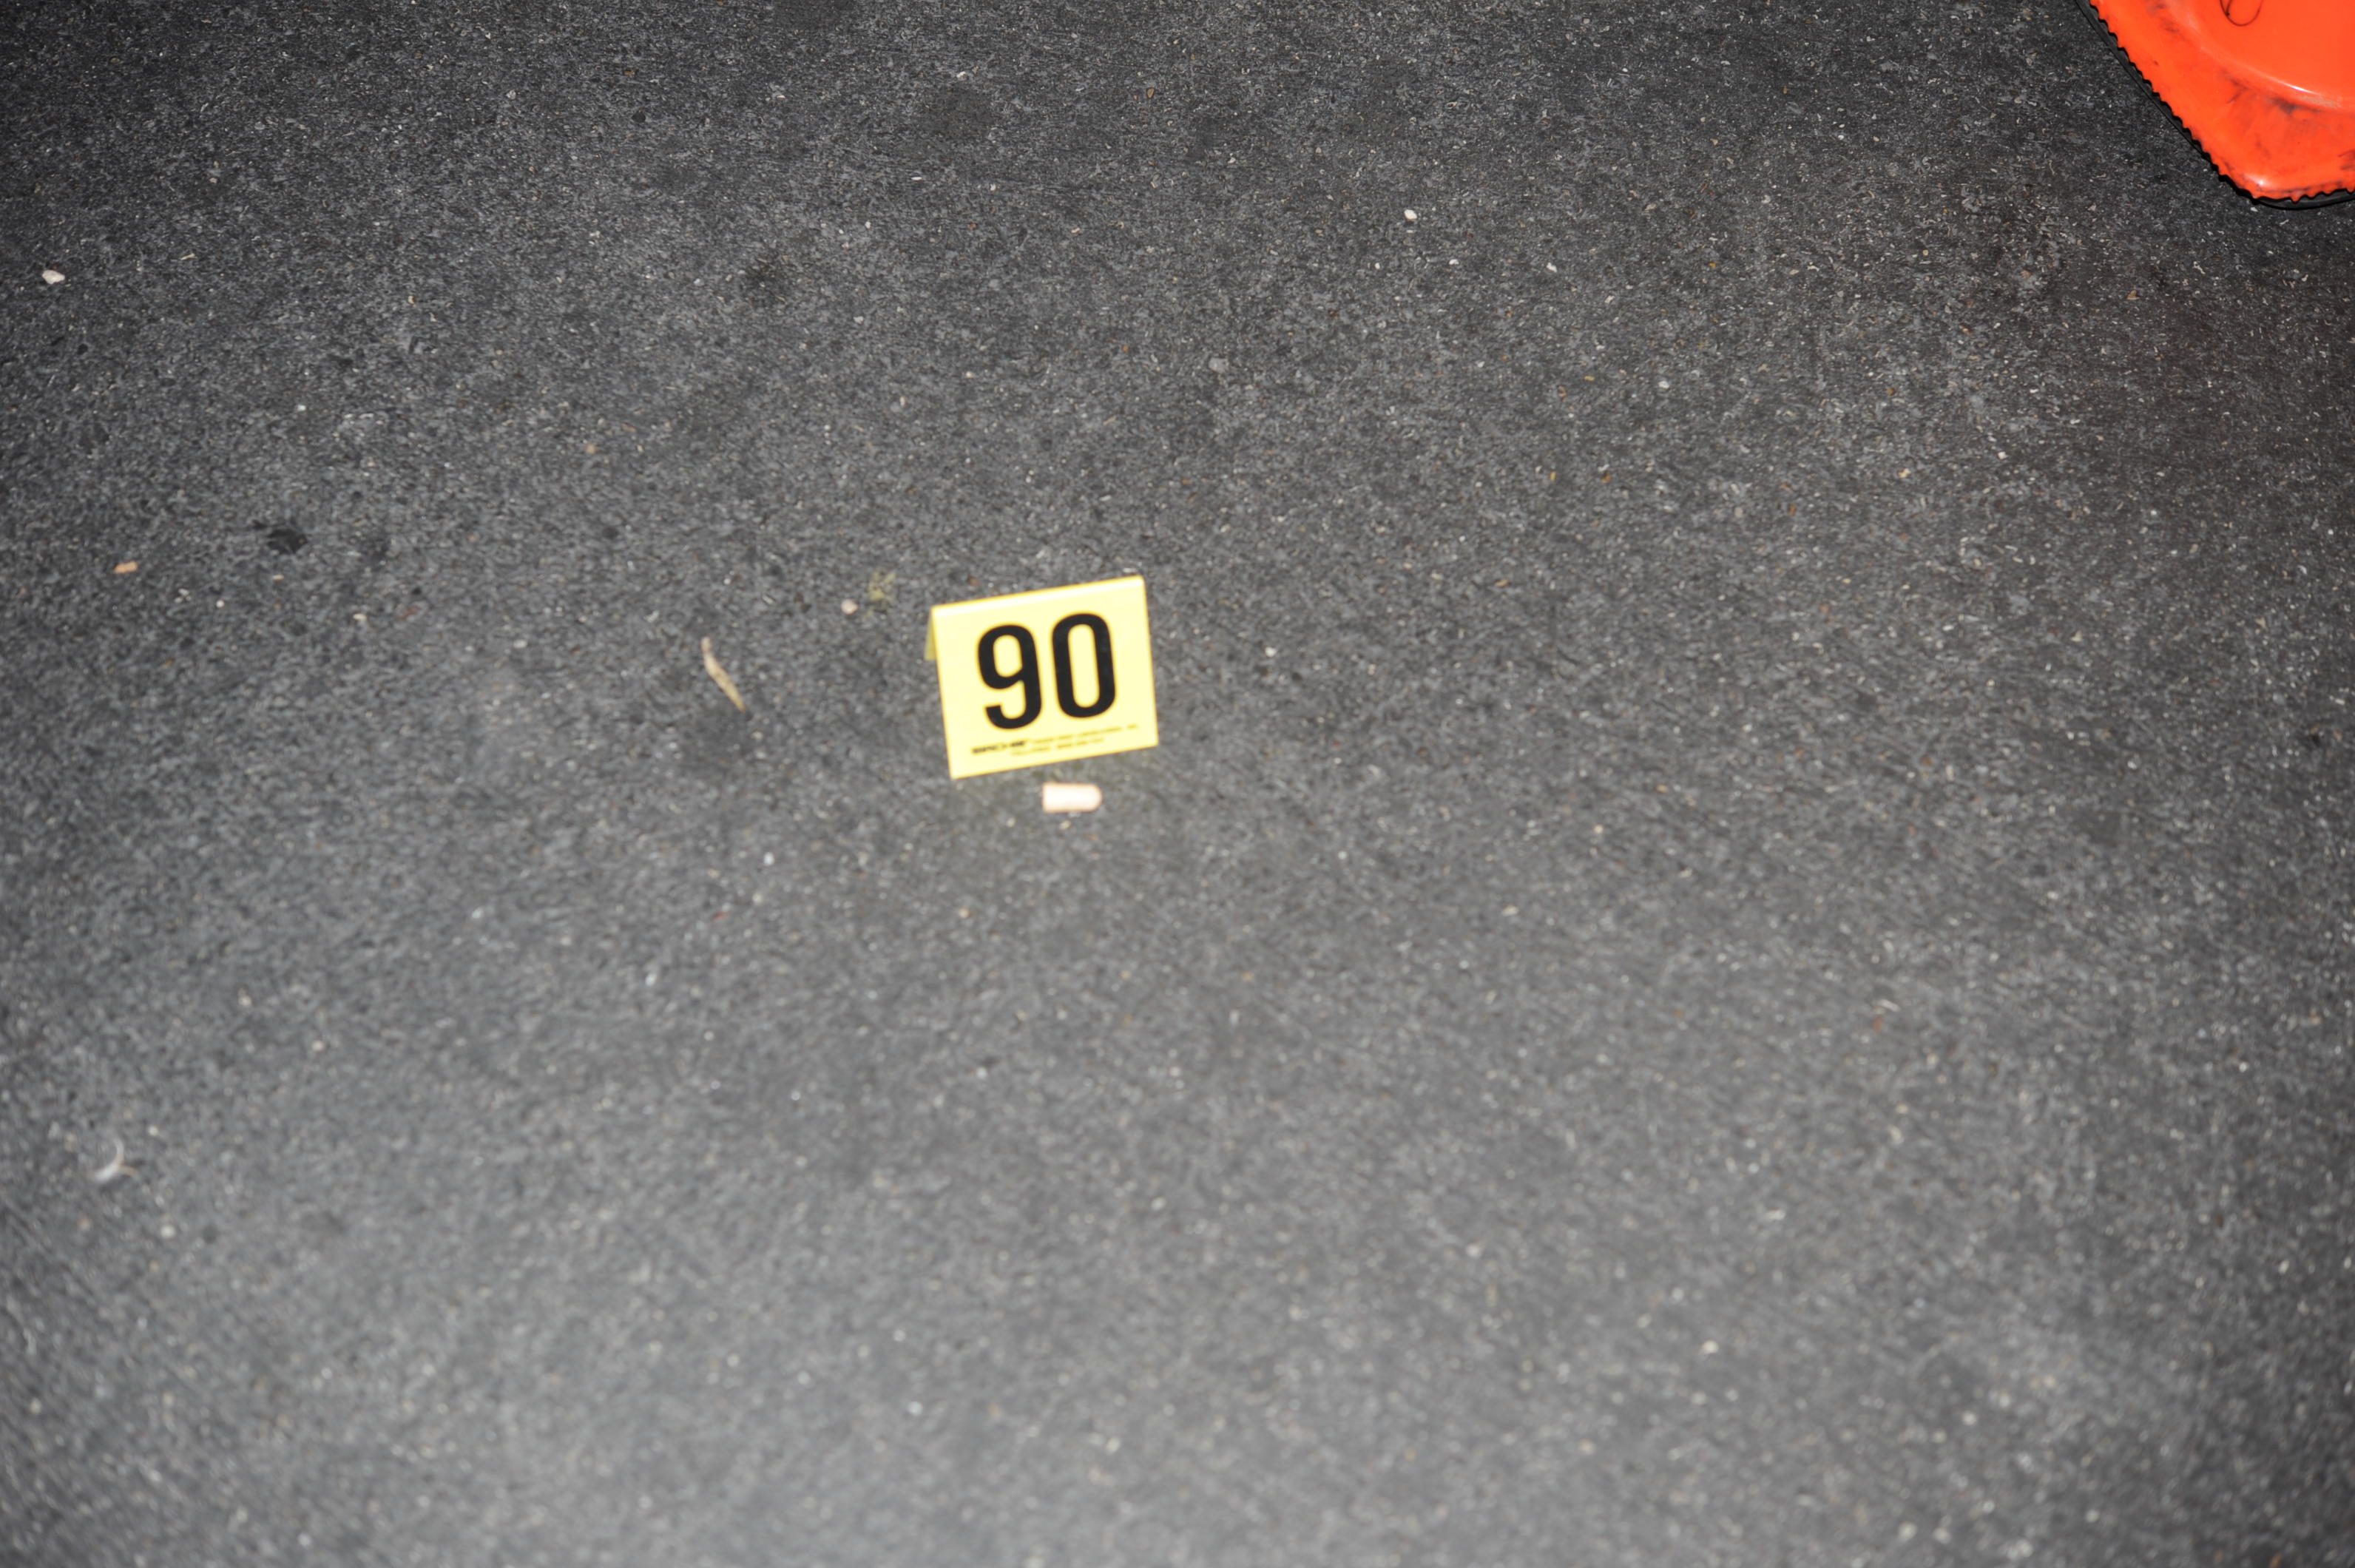 2011 Tucson Shooting Evidence Collected - Photograph 188